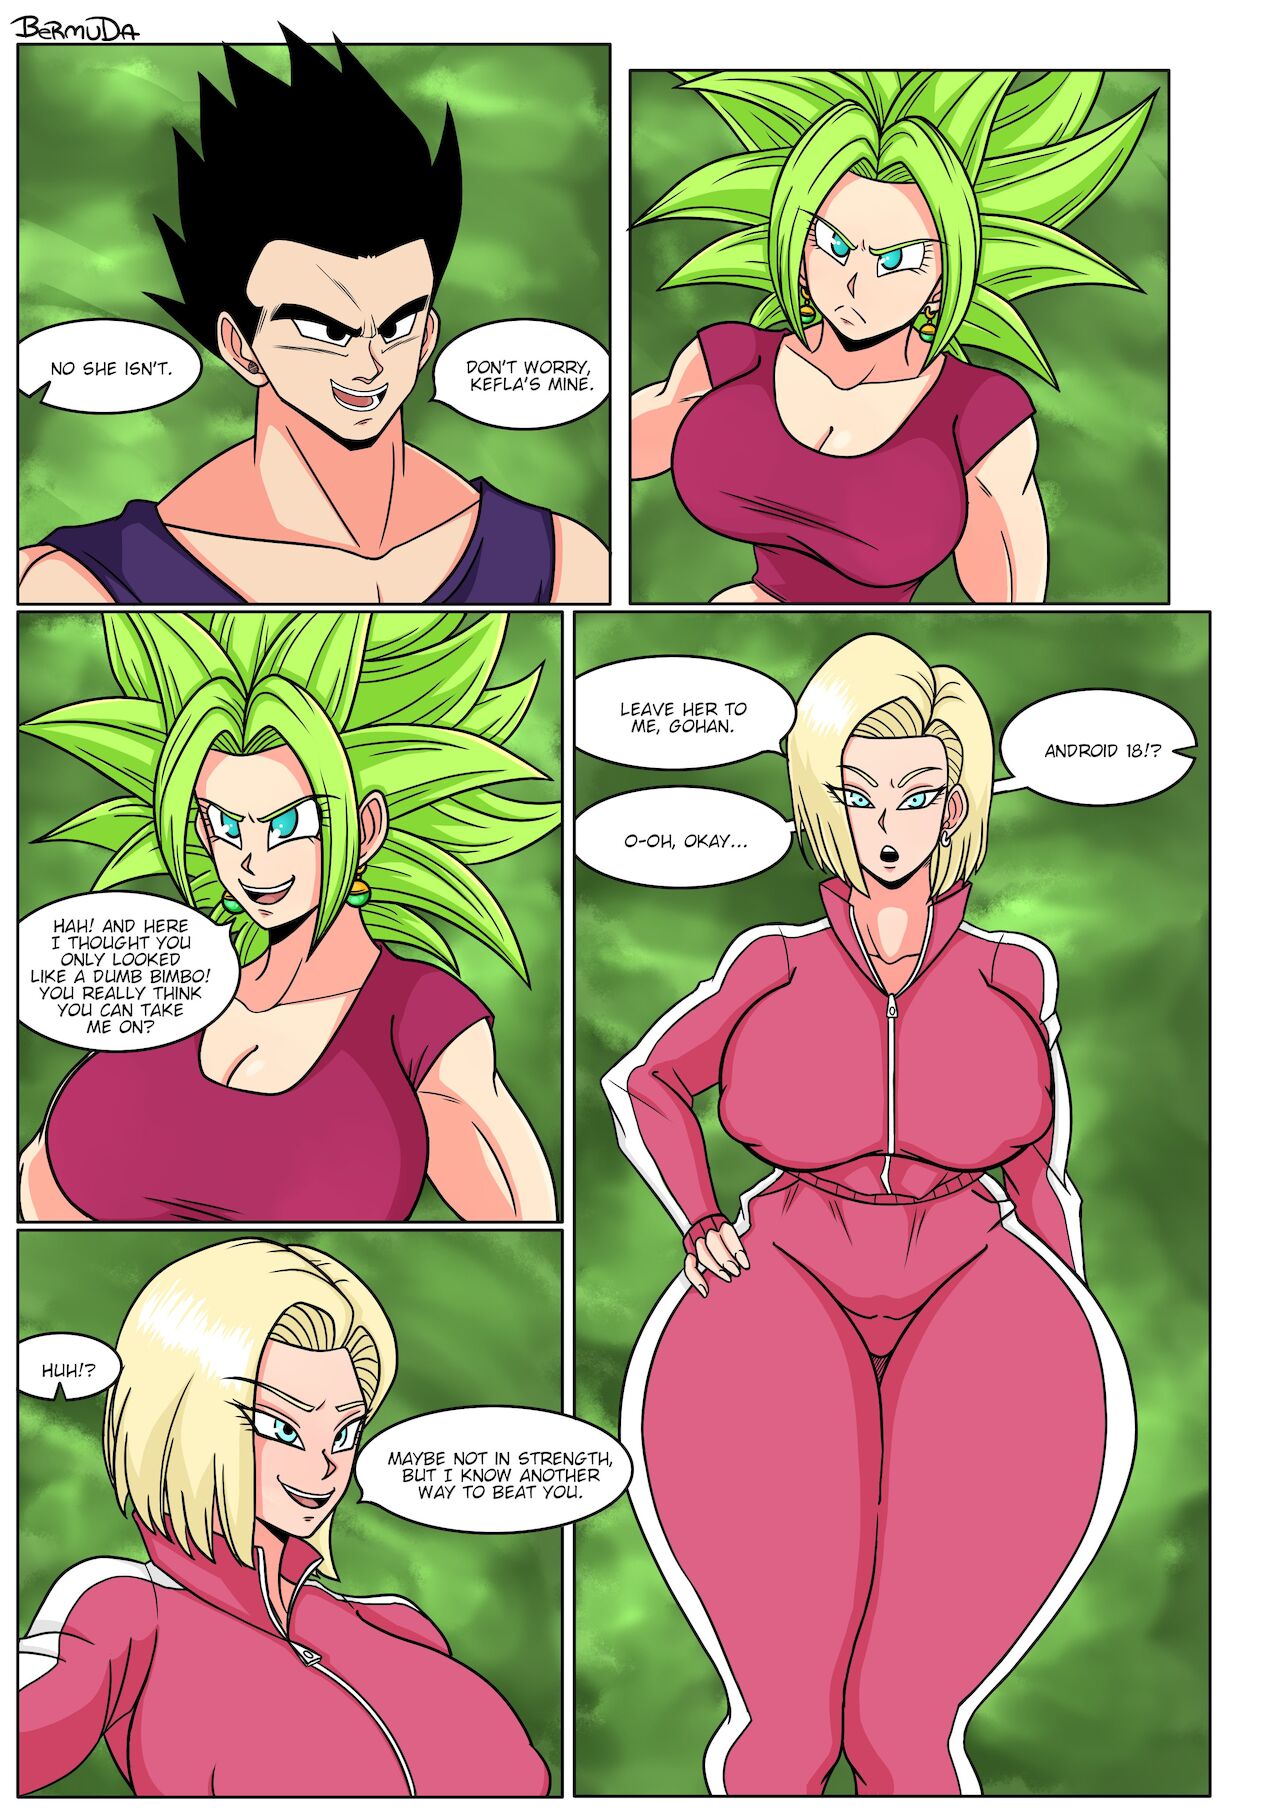 Android 18 Porn Girl - Android 18 Has A Plan - Bermuda - KingComiX.com